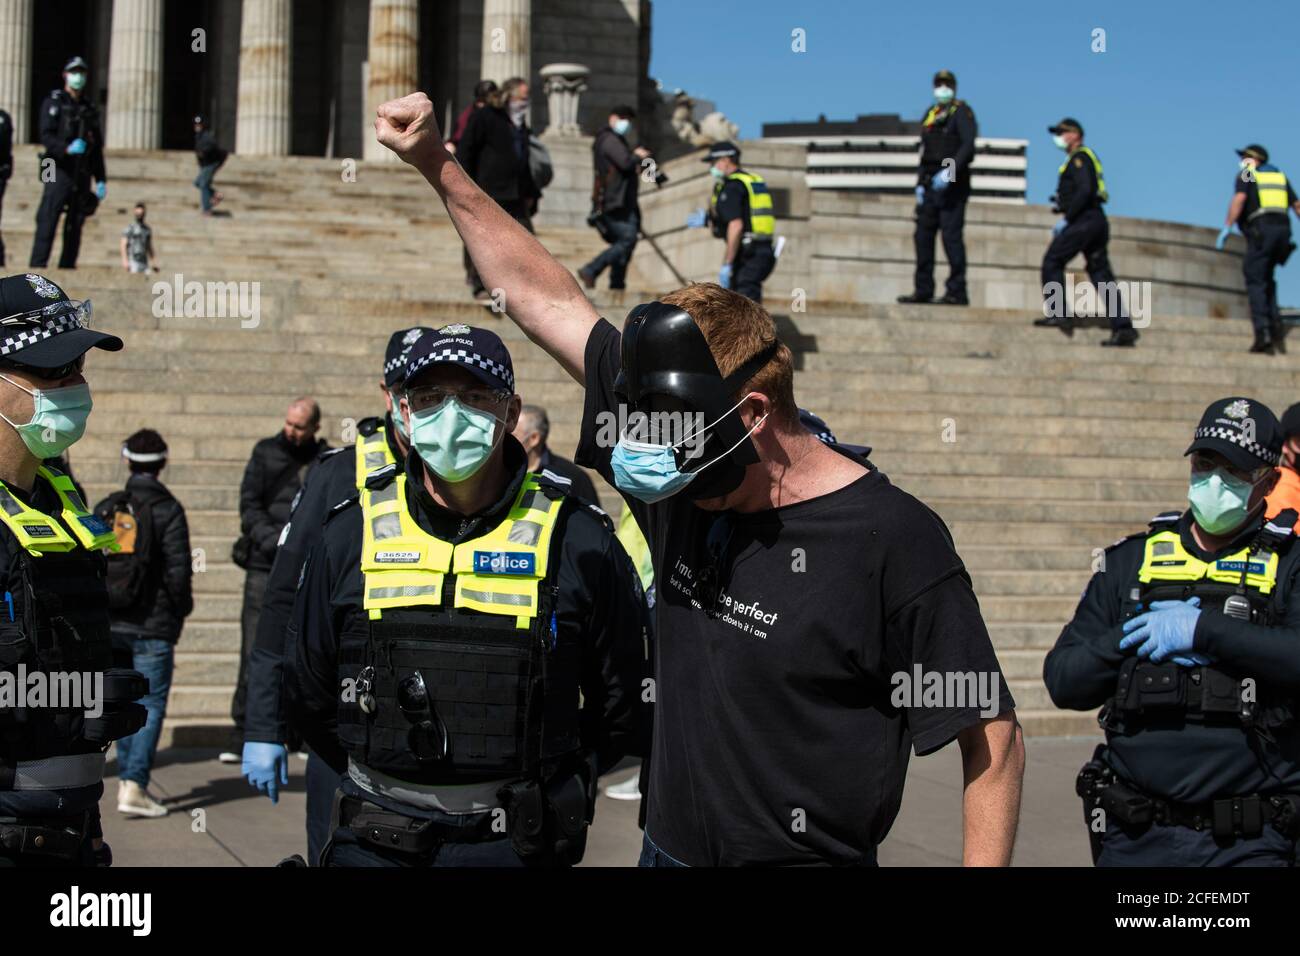 Melbourne, Australia 5 Sep 2020, a protestor in a Darth Vader mask holds his first in the air at the Freedom Day Anti-mask and anti lockdown protest on the steps of the Shrine of Remembrance in Melbourne Australia. Credit: Michael Currie/Alamy Live News Stock Photo